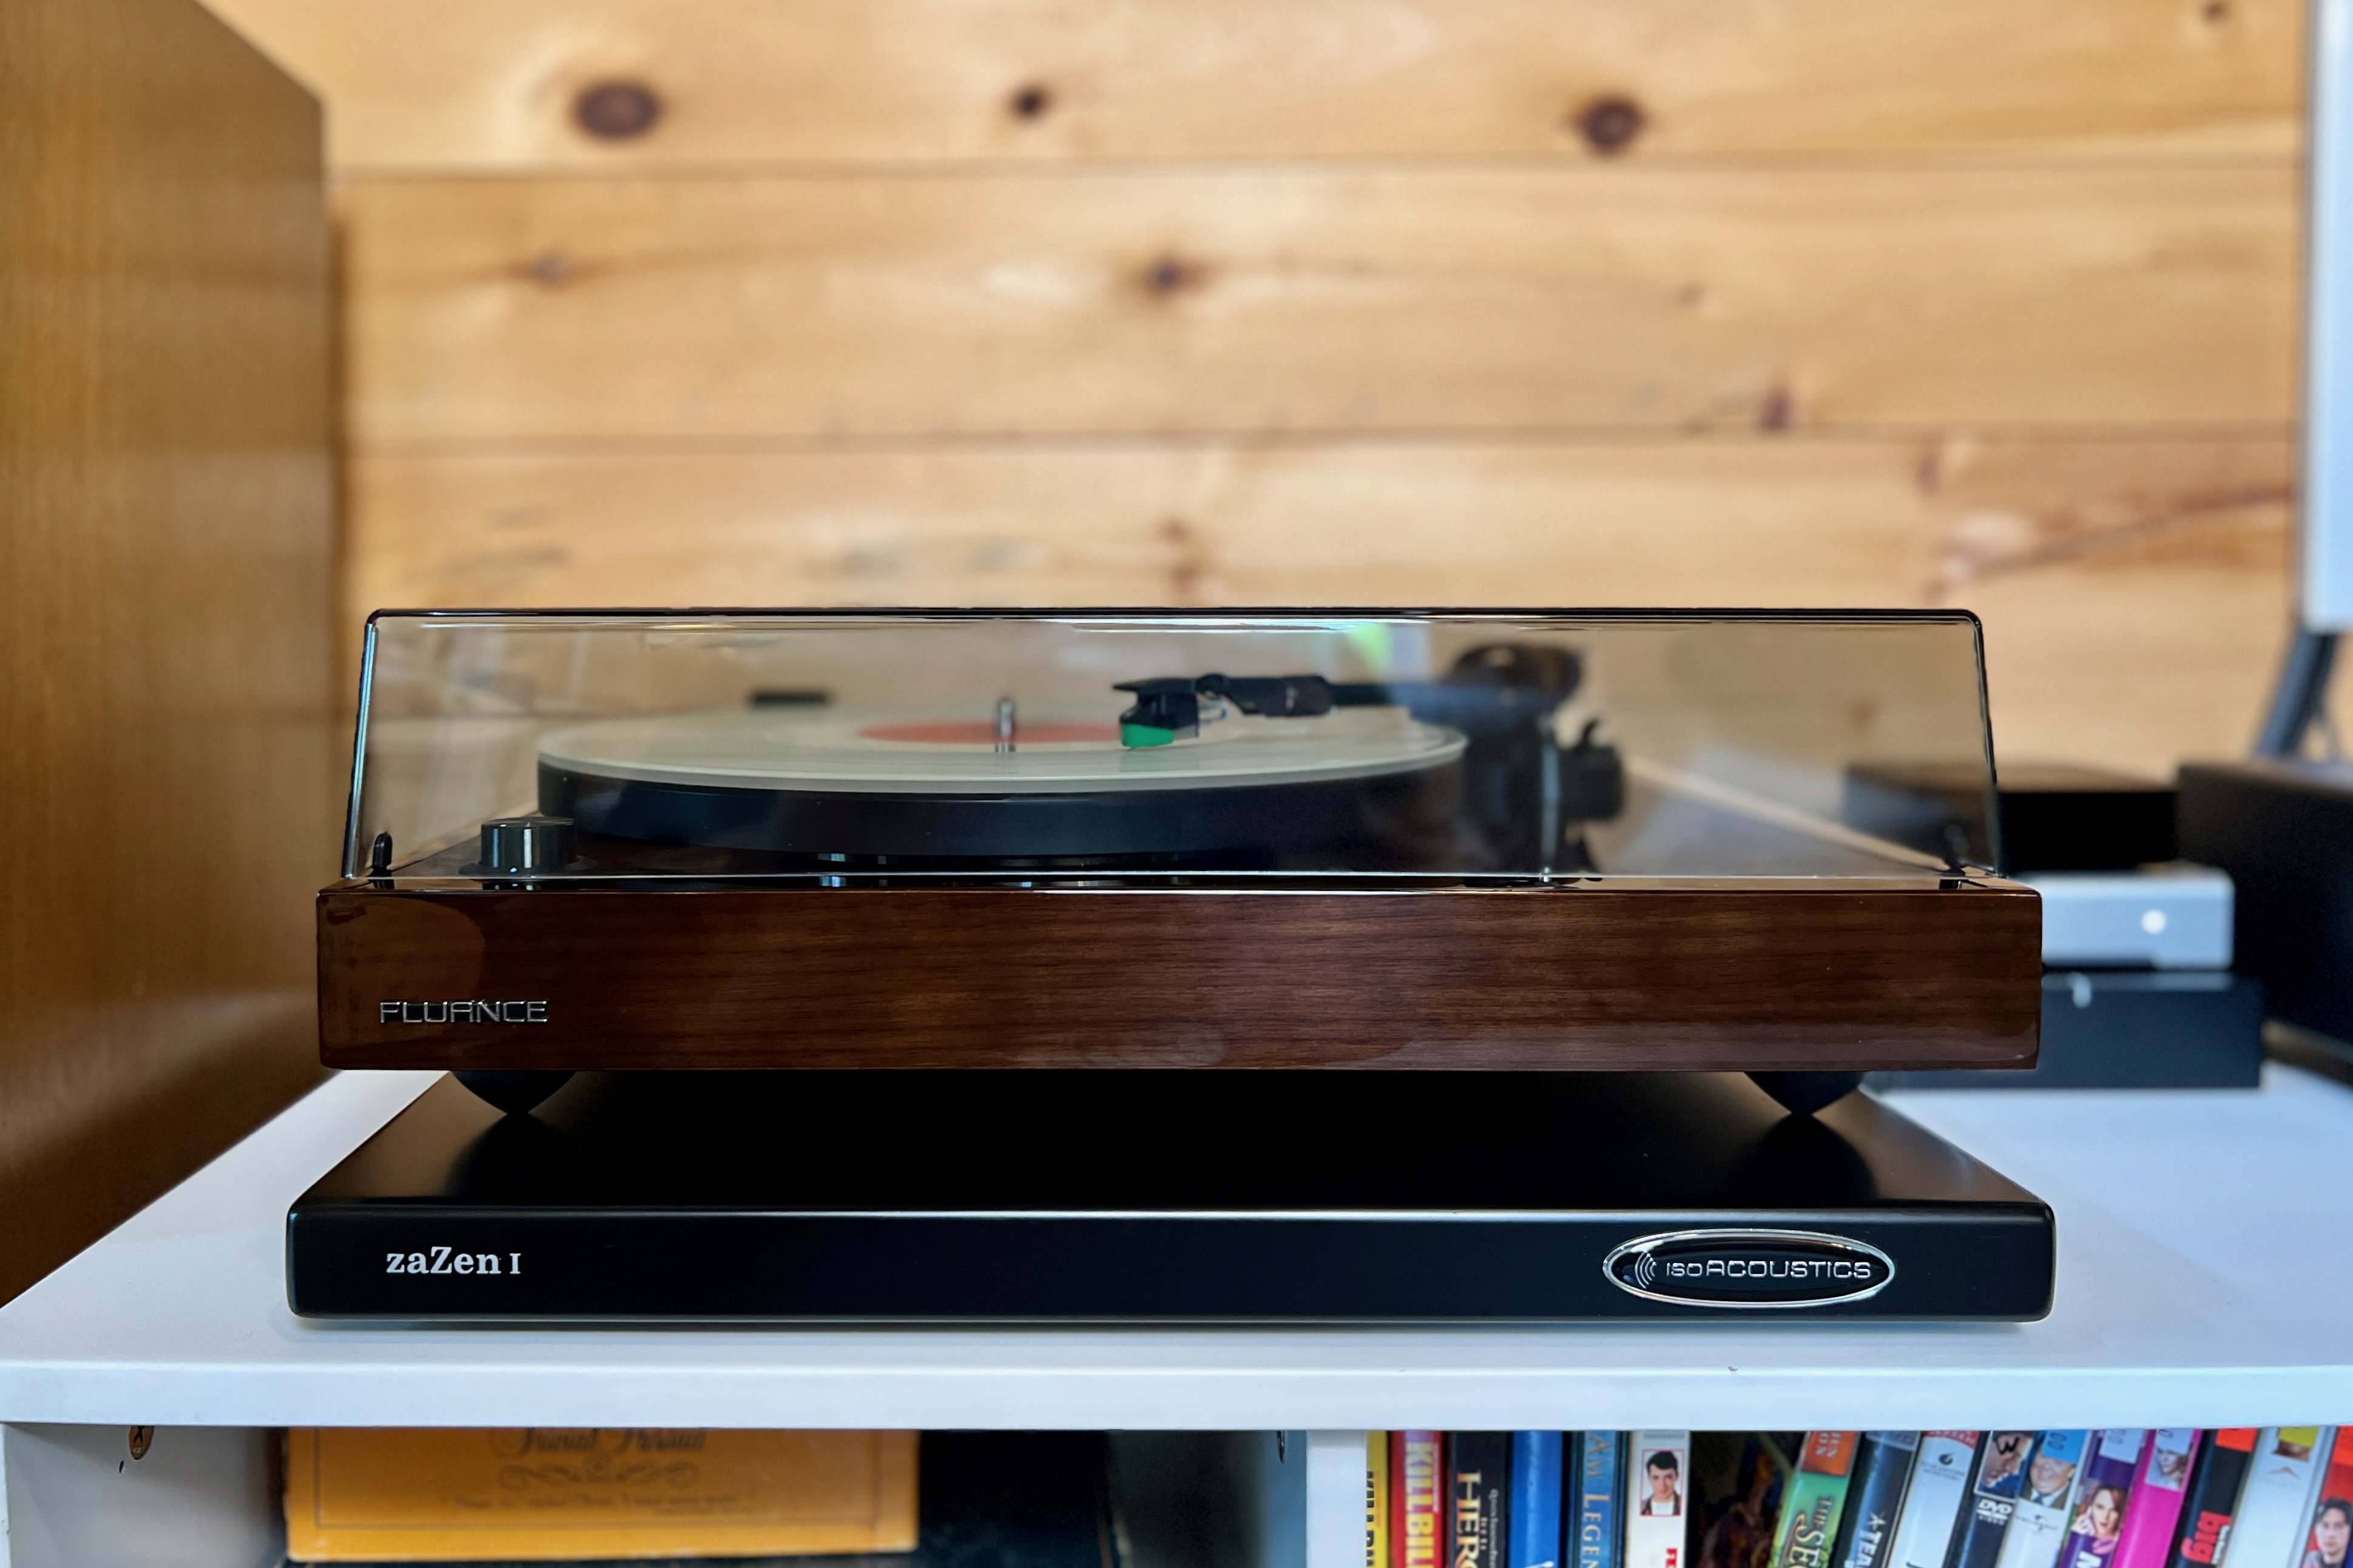 The Fluance RT81+ turntable in walnut finish with the dust cover down.